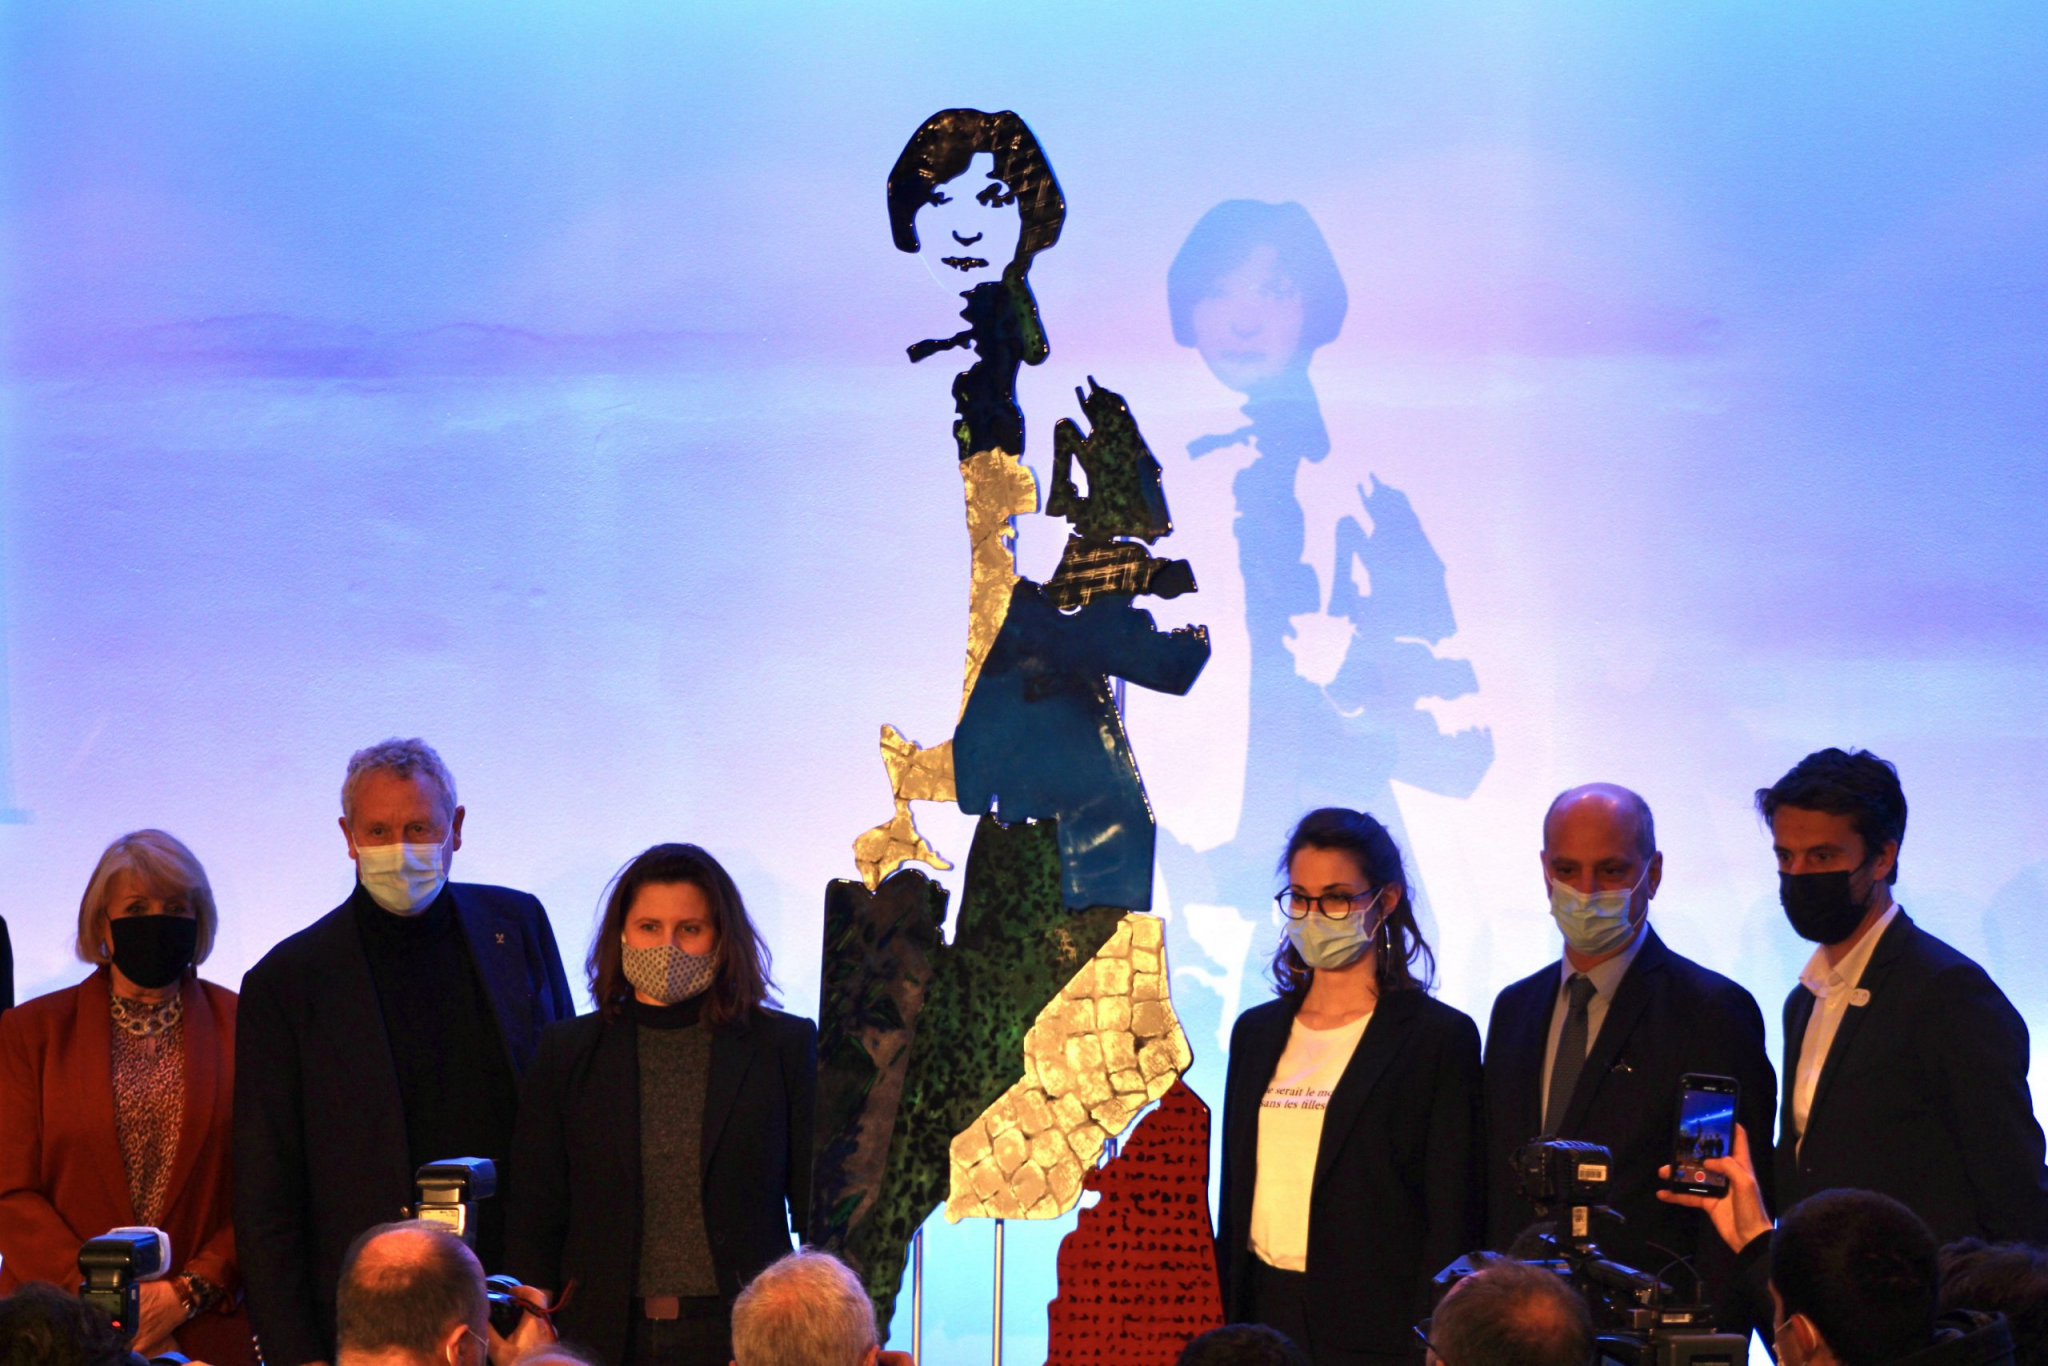 The unveiling of a statue celebrating women's sport pioneer Alice Milliat at the headquarters of the CNOSF in Paris was the initiative of  Emmanuelle Bonnet-Oulaldj ©CNOSF